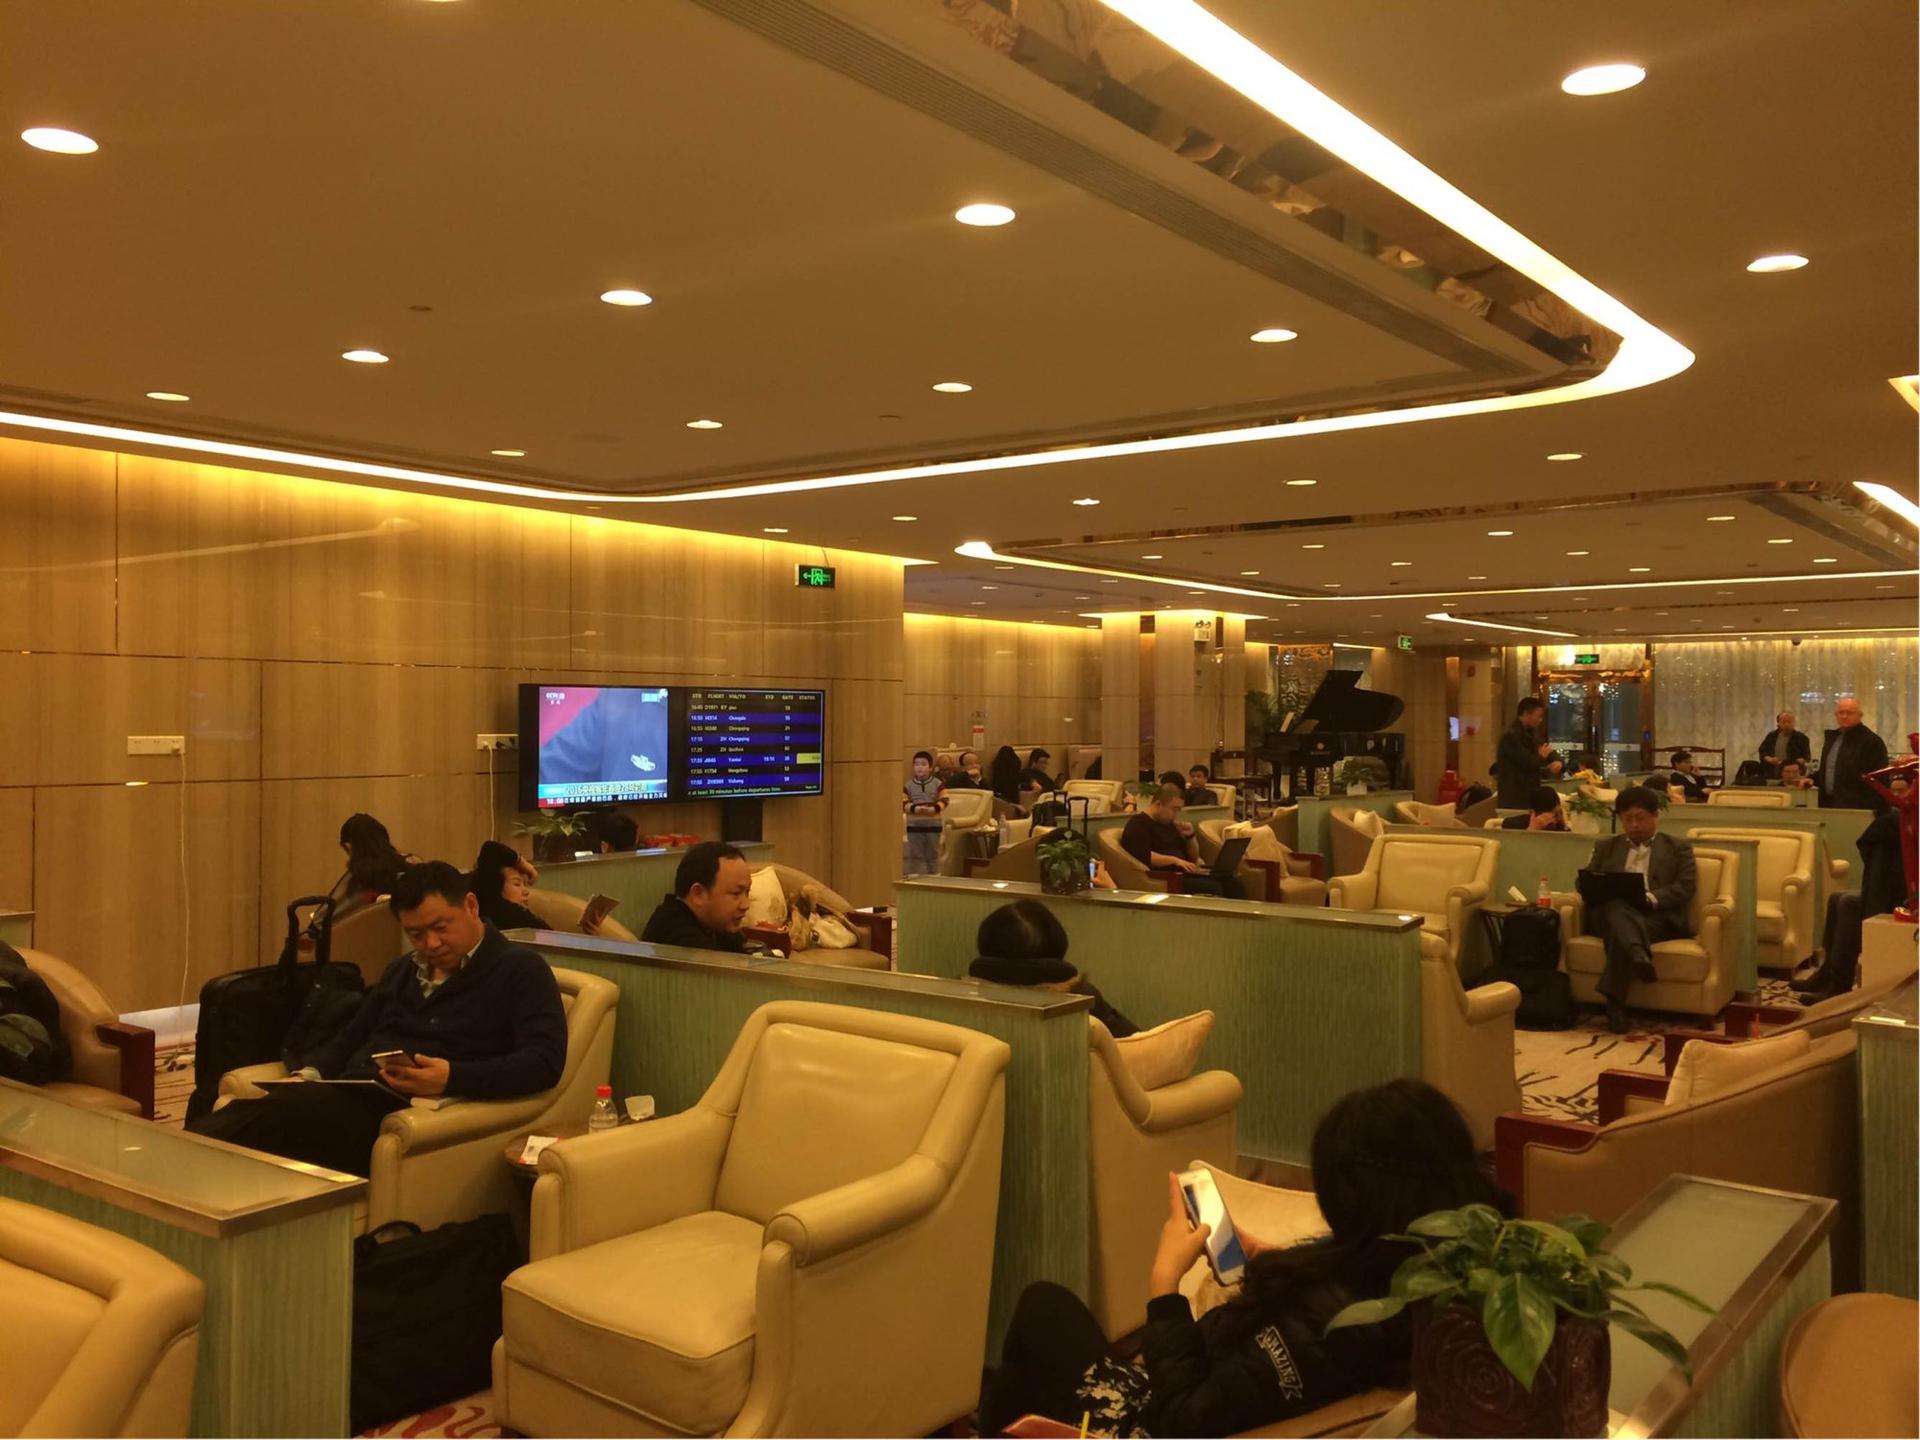 Shenzhen Airlines King Lounge Hall 2 image 3 of 7